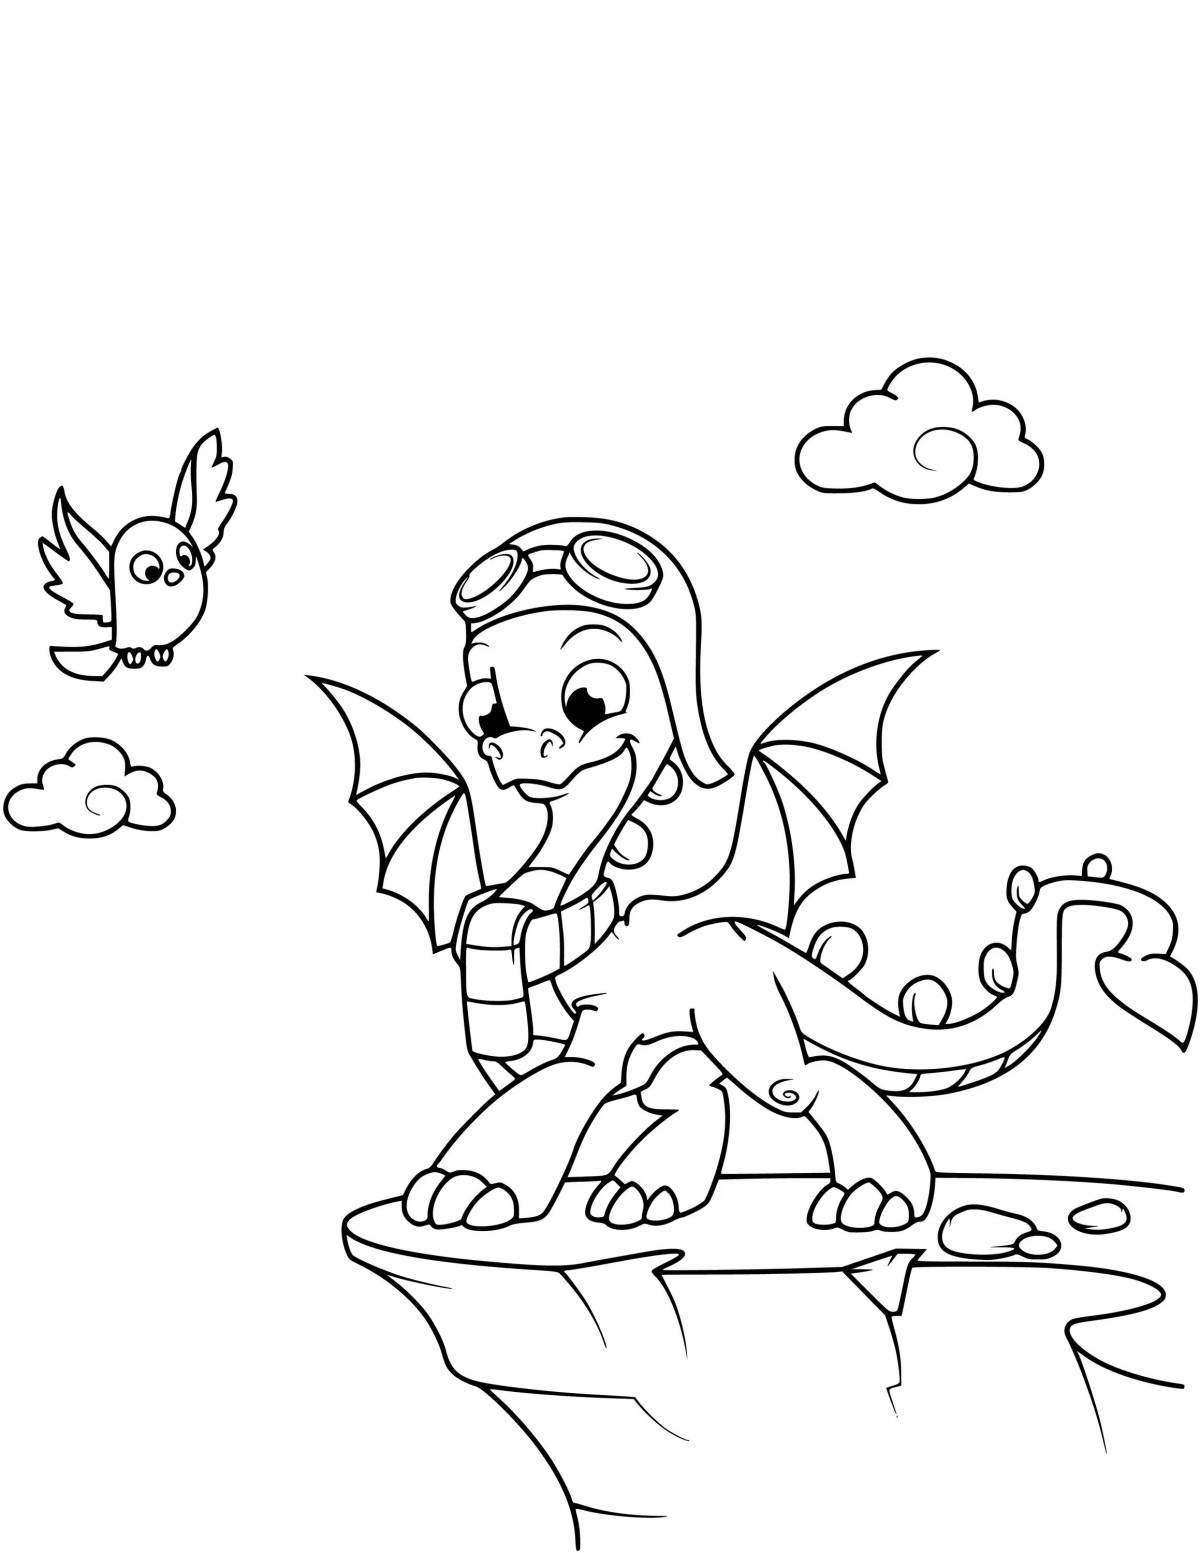 Adorable dragon coloring book for kids